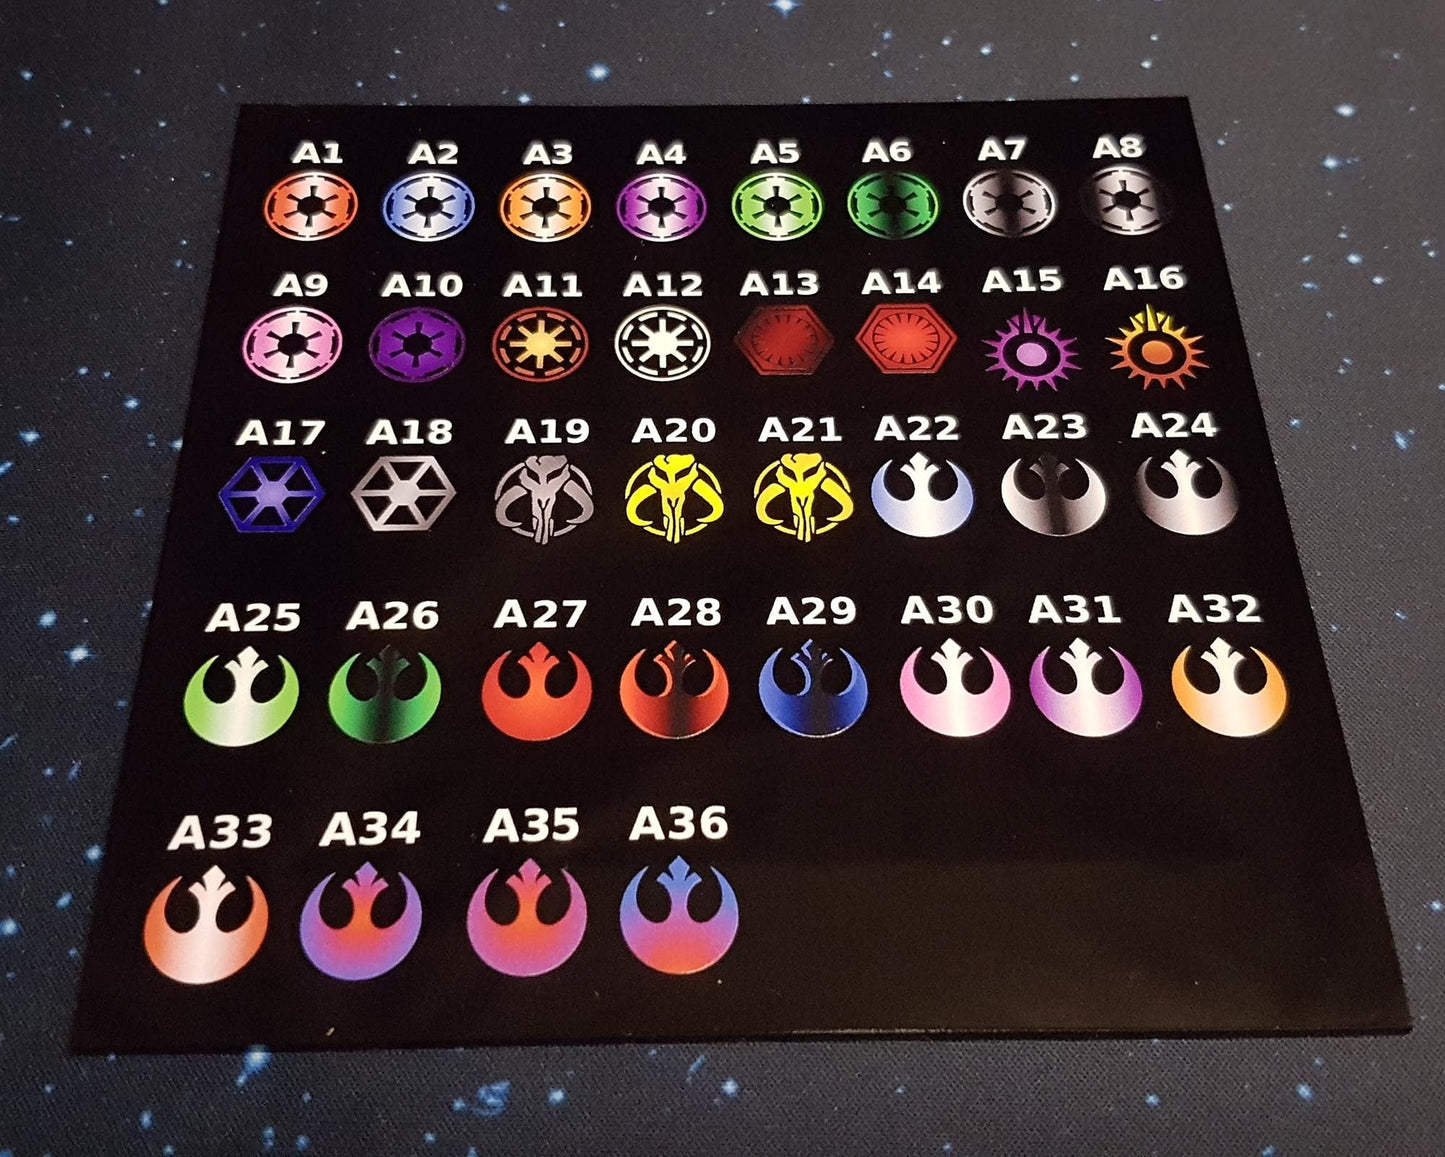 V2 Acrylic Colour Printed Damage Deck Holder (Separatist Alliance) for Star Wars X-Wing